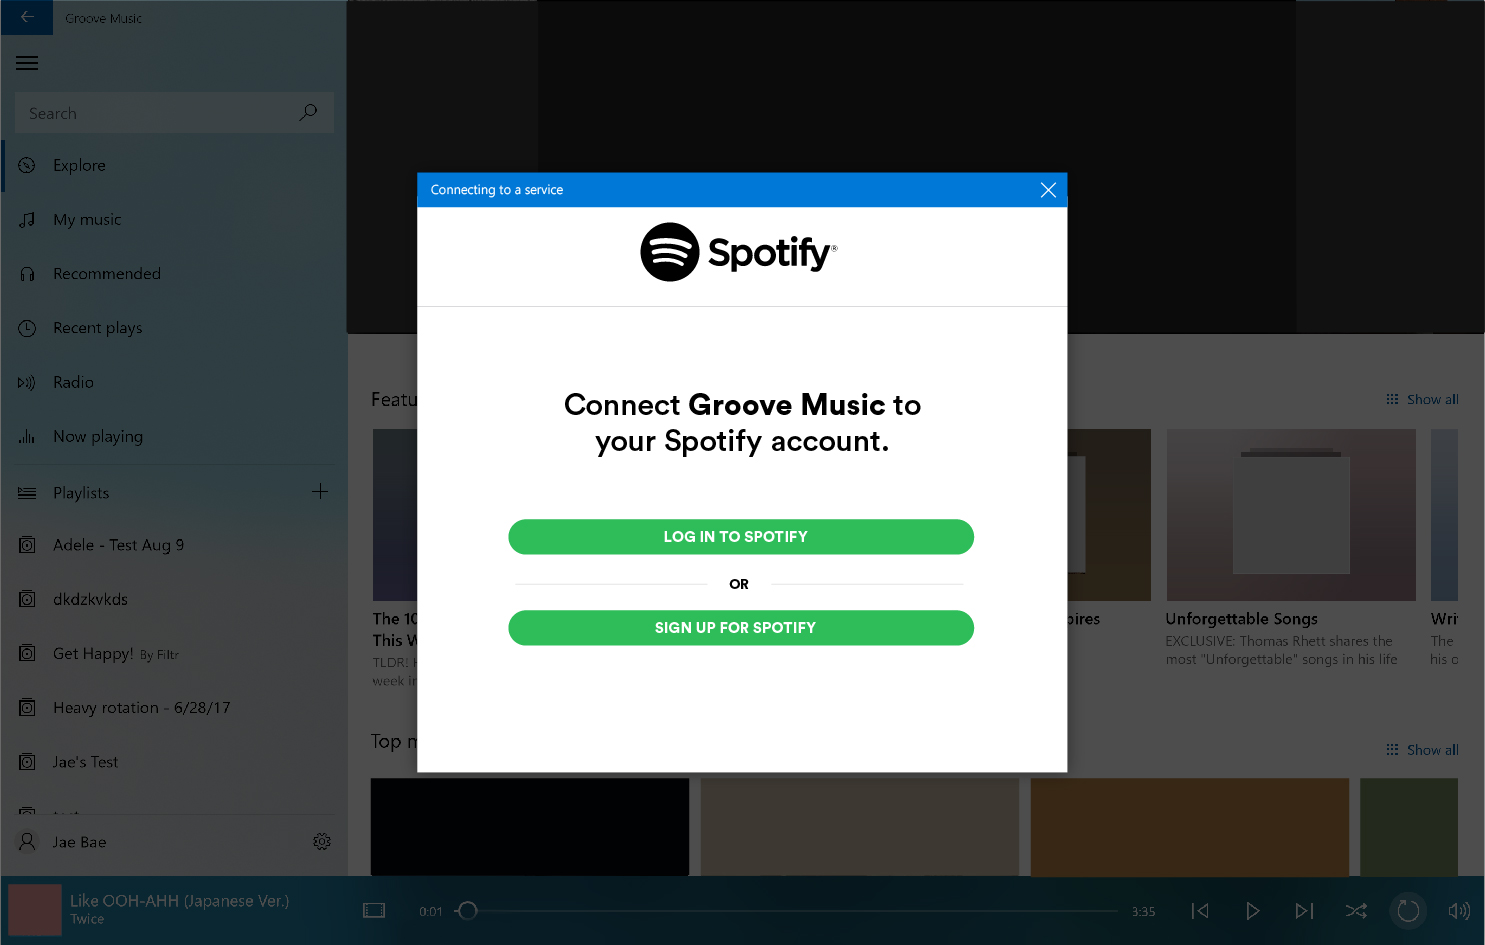 Prompt asking users to connect Groove Music to their Spotify account by signing into Spotify or creating a new Spotify account.